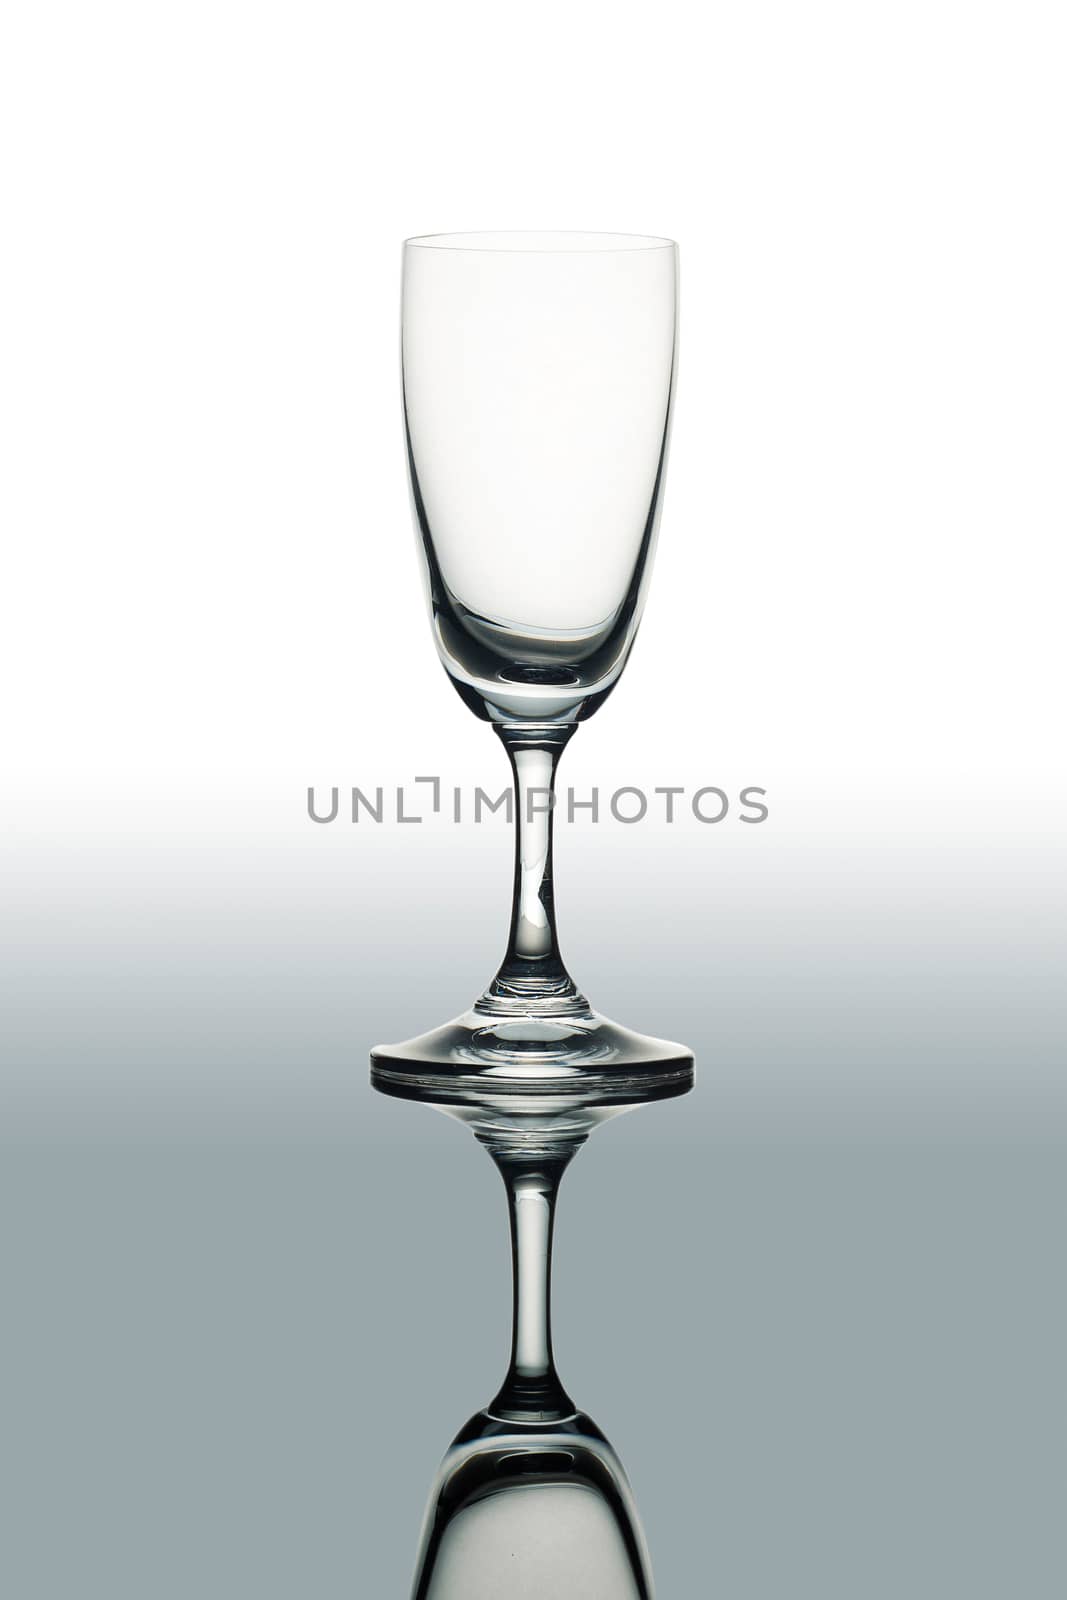 Empty wine glass isolated on the white background, clipping path included.